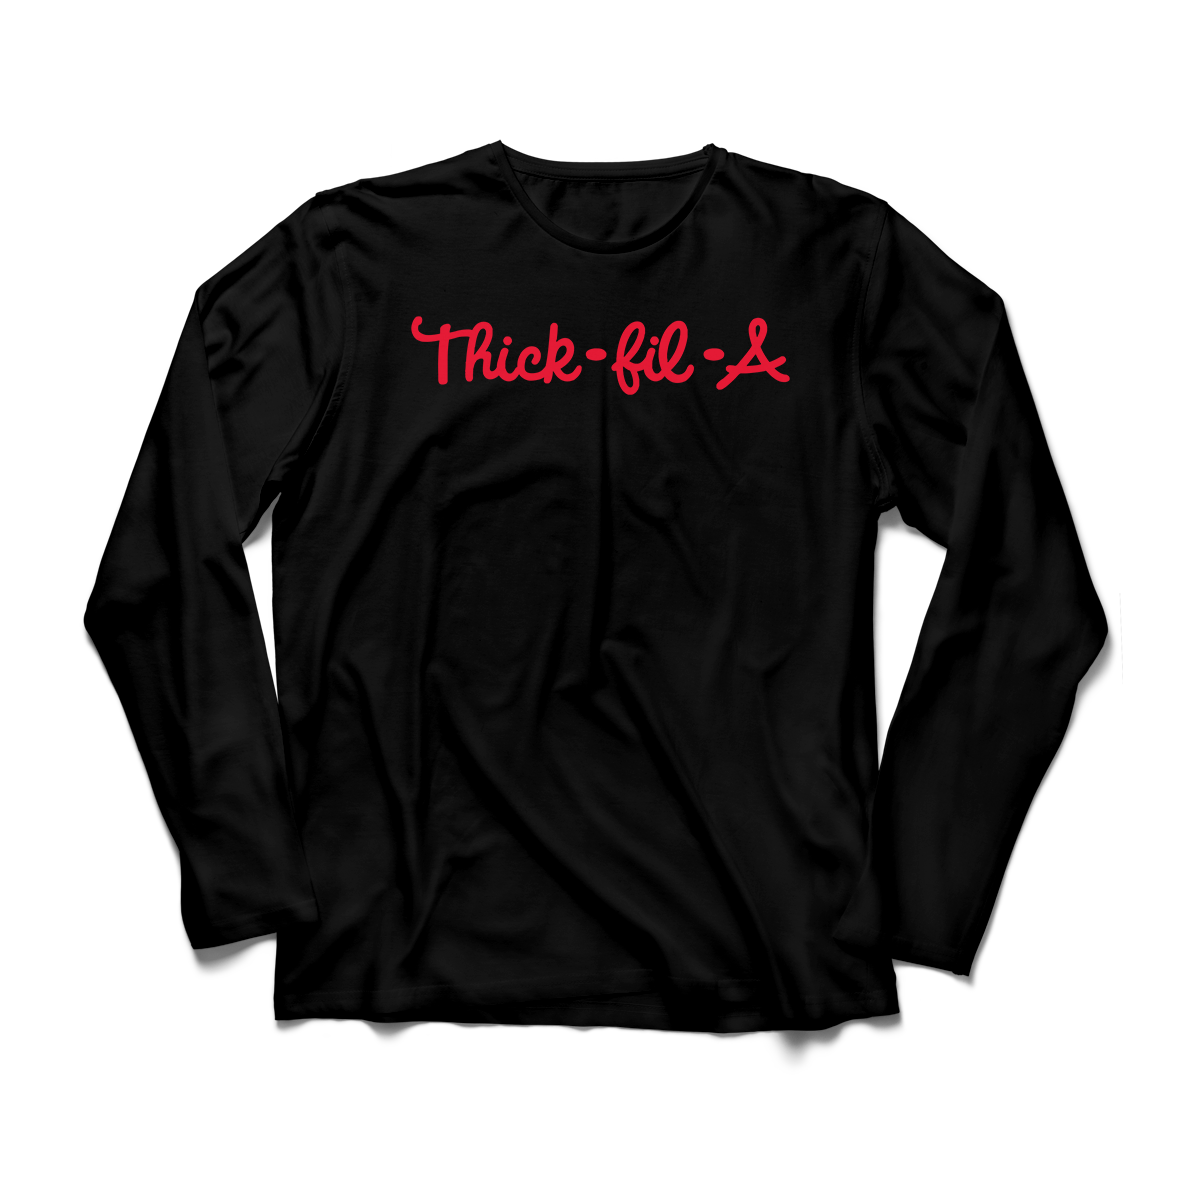 'Thick-Fil-A' Comfort Long Sleeve